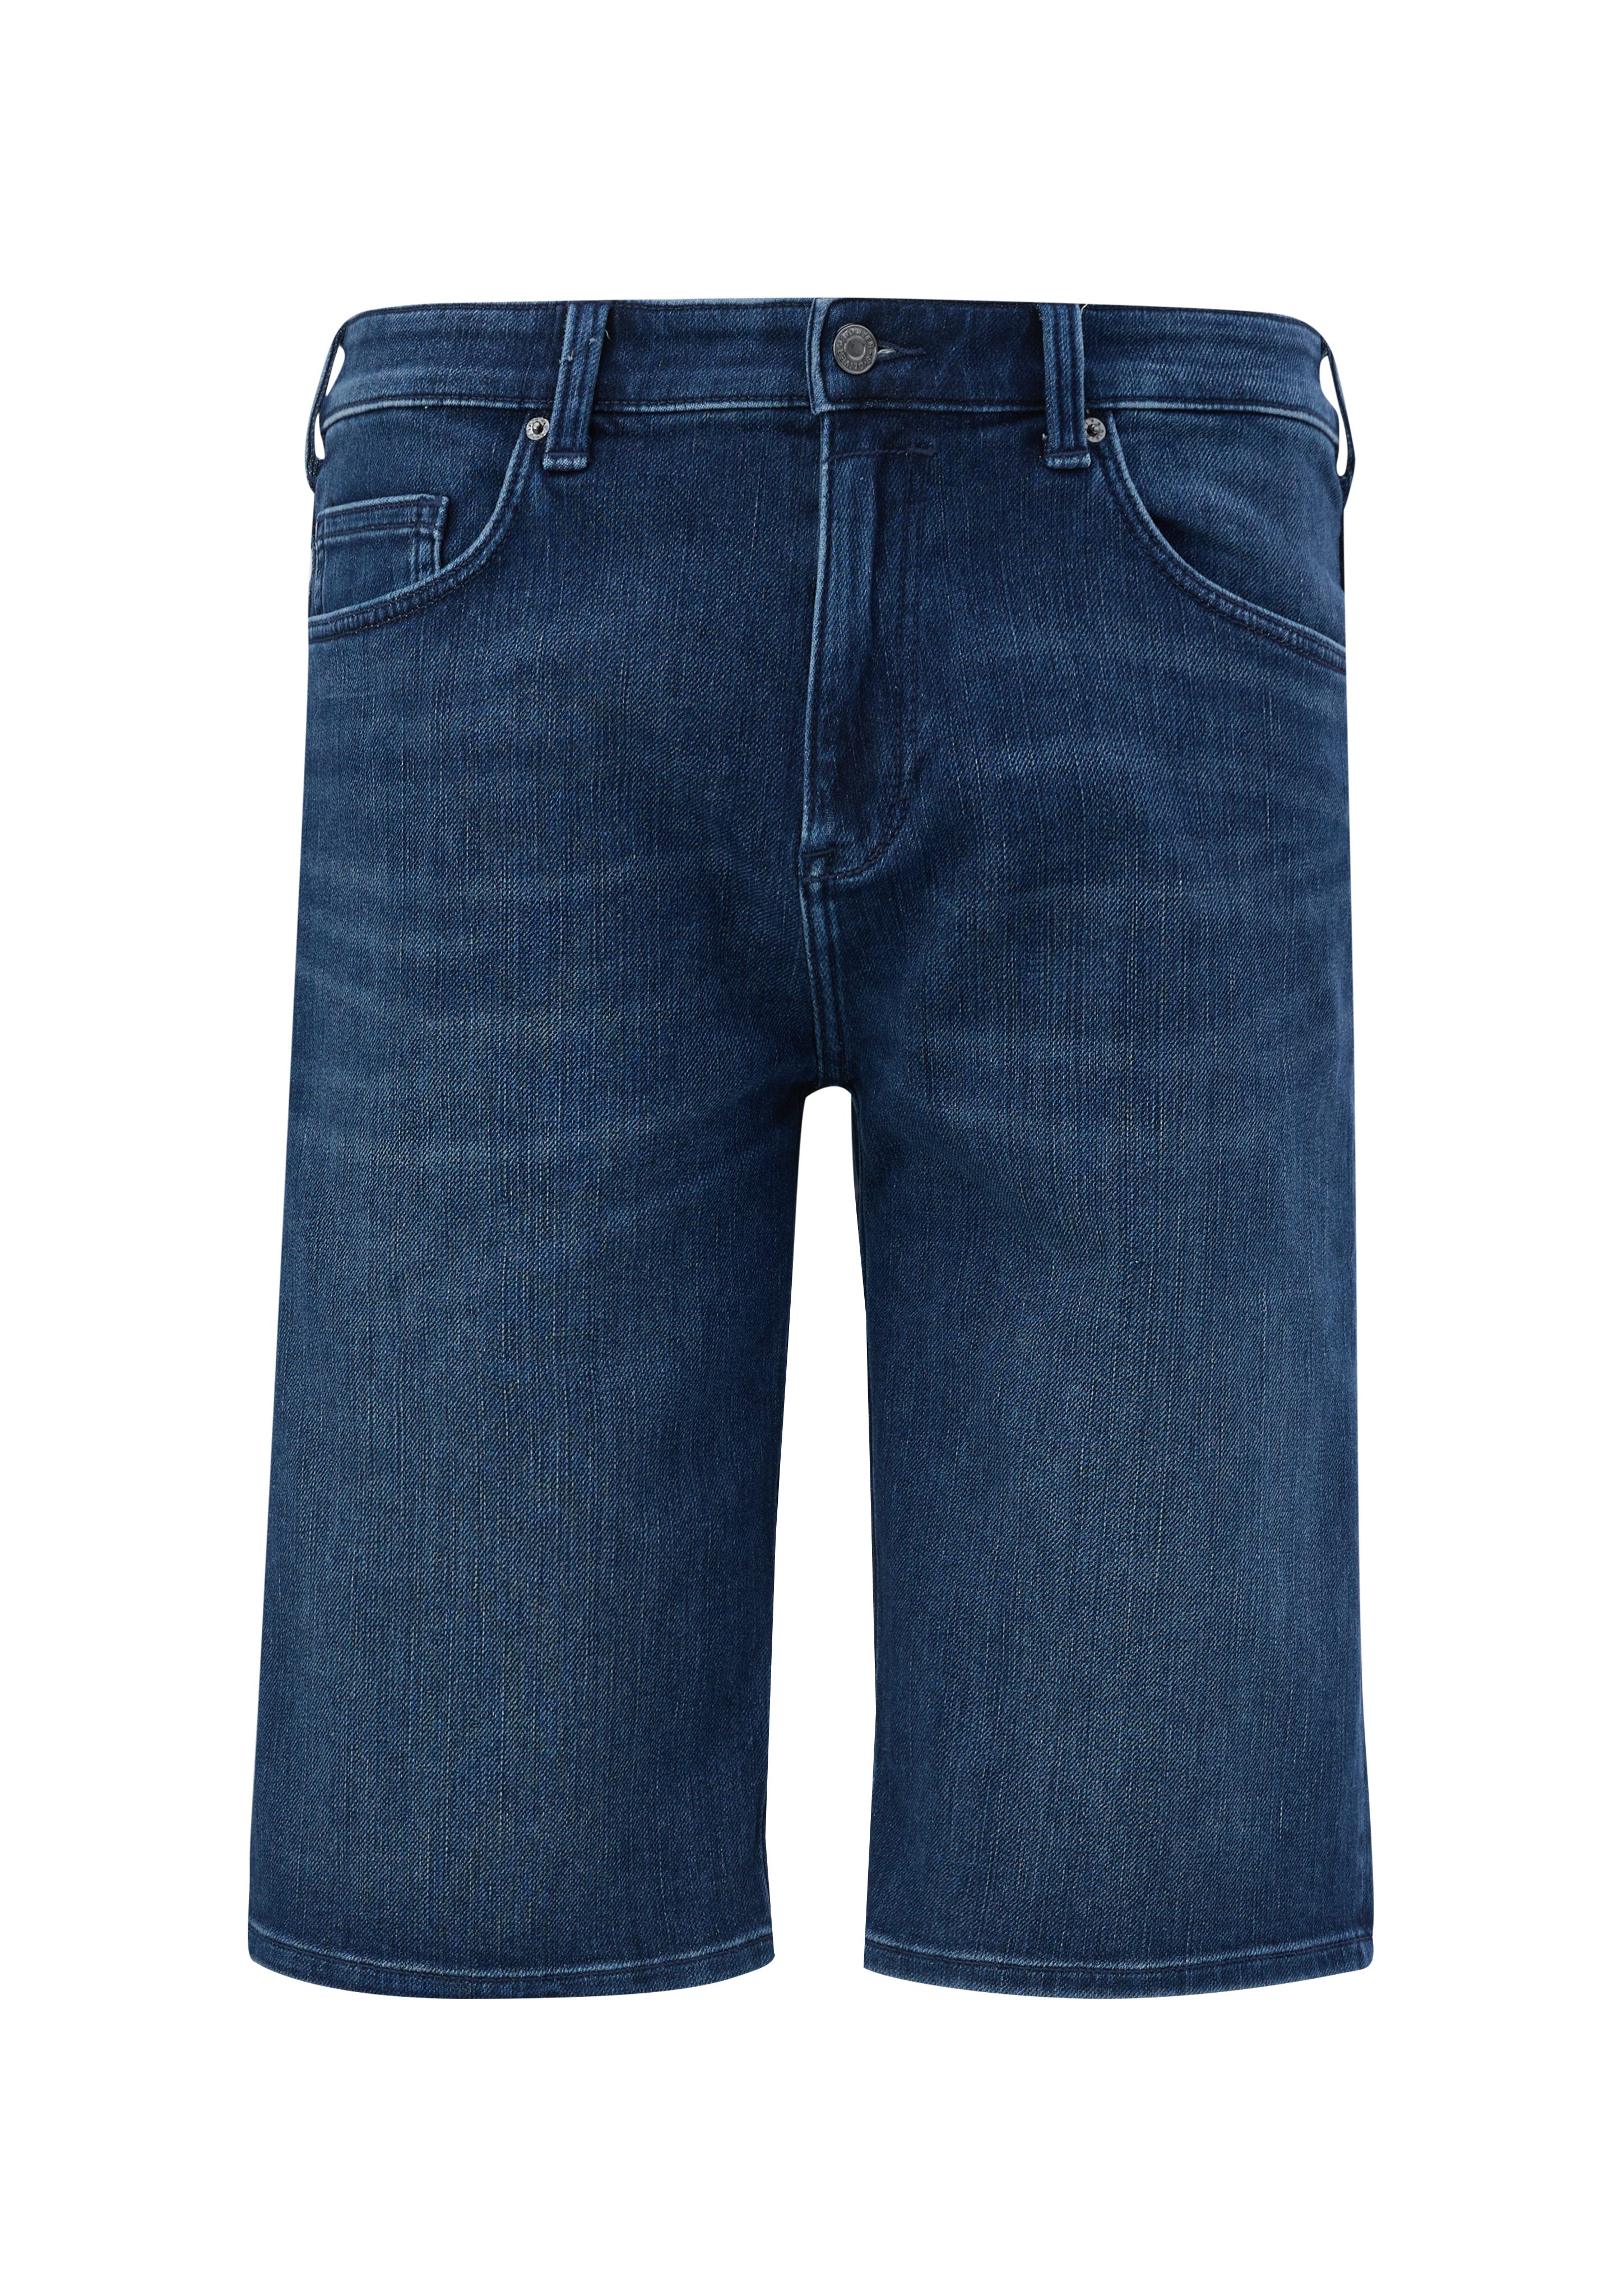 tiefblau Mid Jeansshorts Casby Relaxed Rise Straight / / / Jeans-Shorts Leg s.Oliver Fit